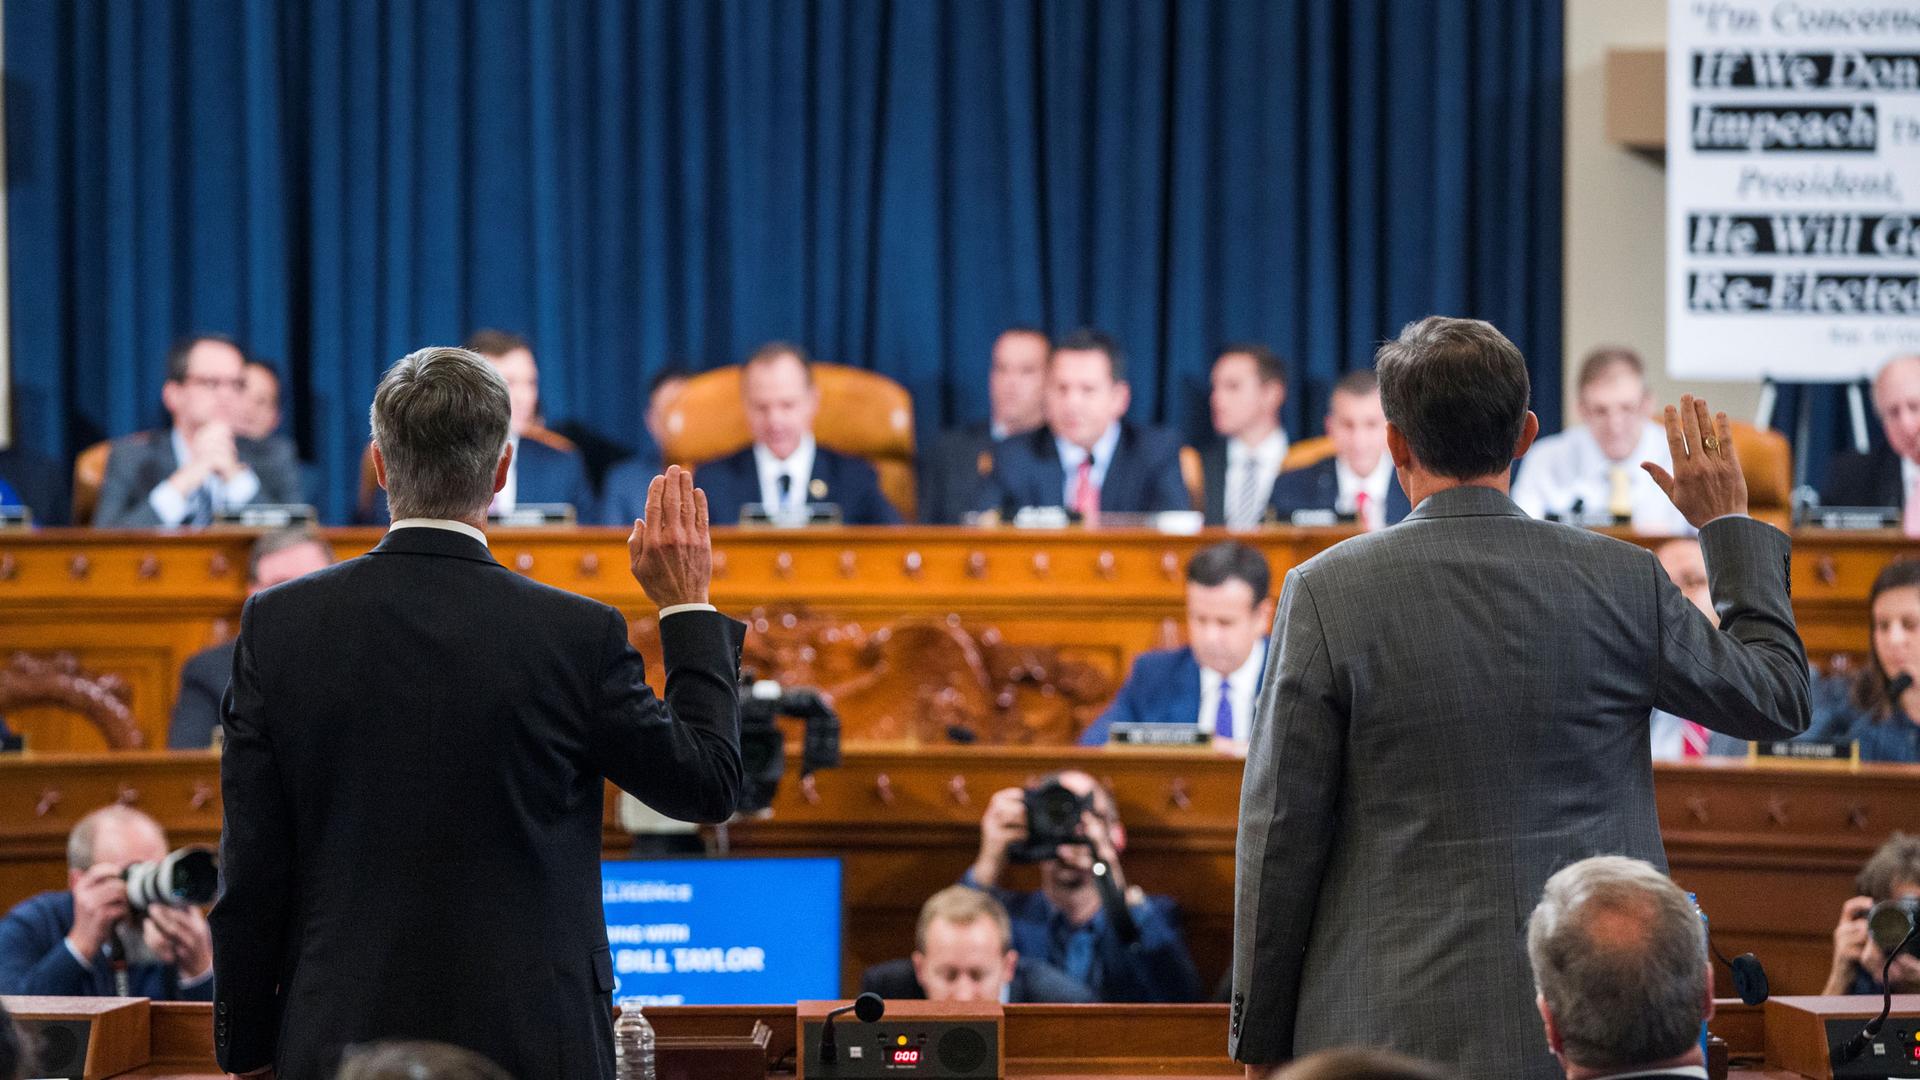 Two men stand with their backs to the camera, their right hands held in the air for an oath. Ahead of them is a row of lawmakers seated behind a large desk.